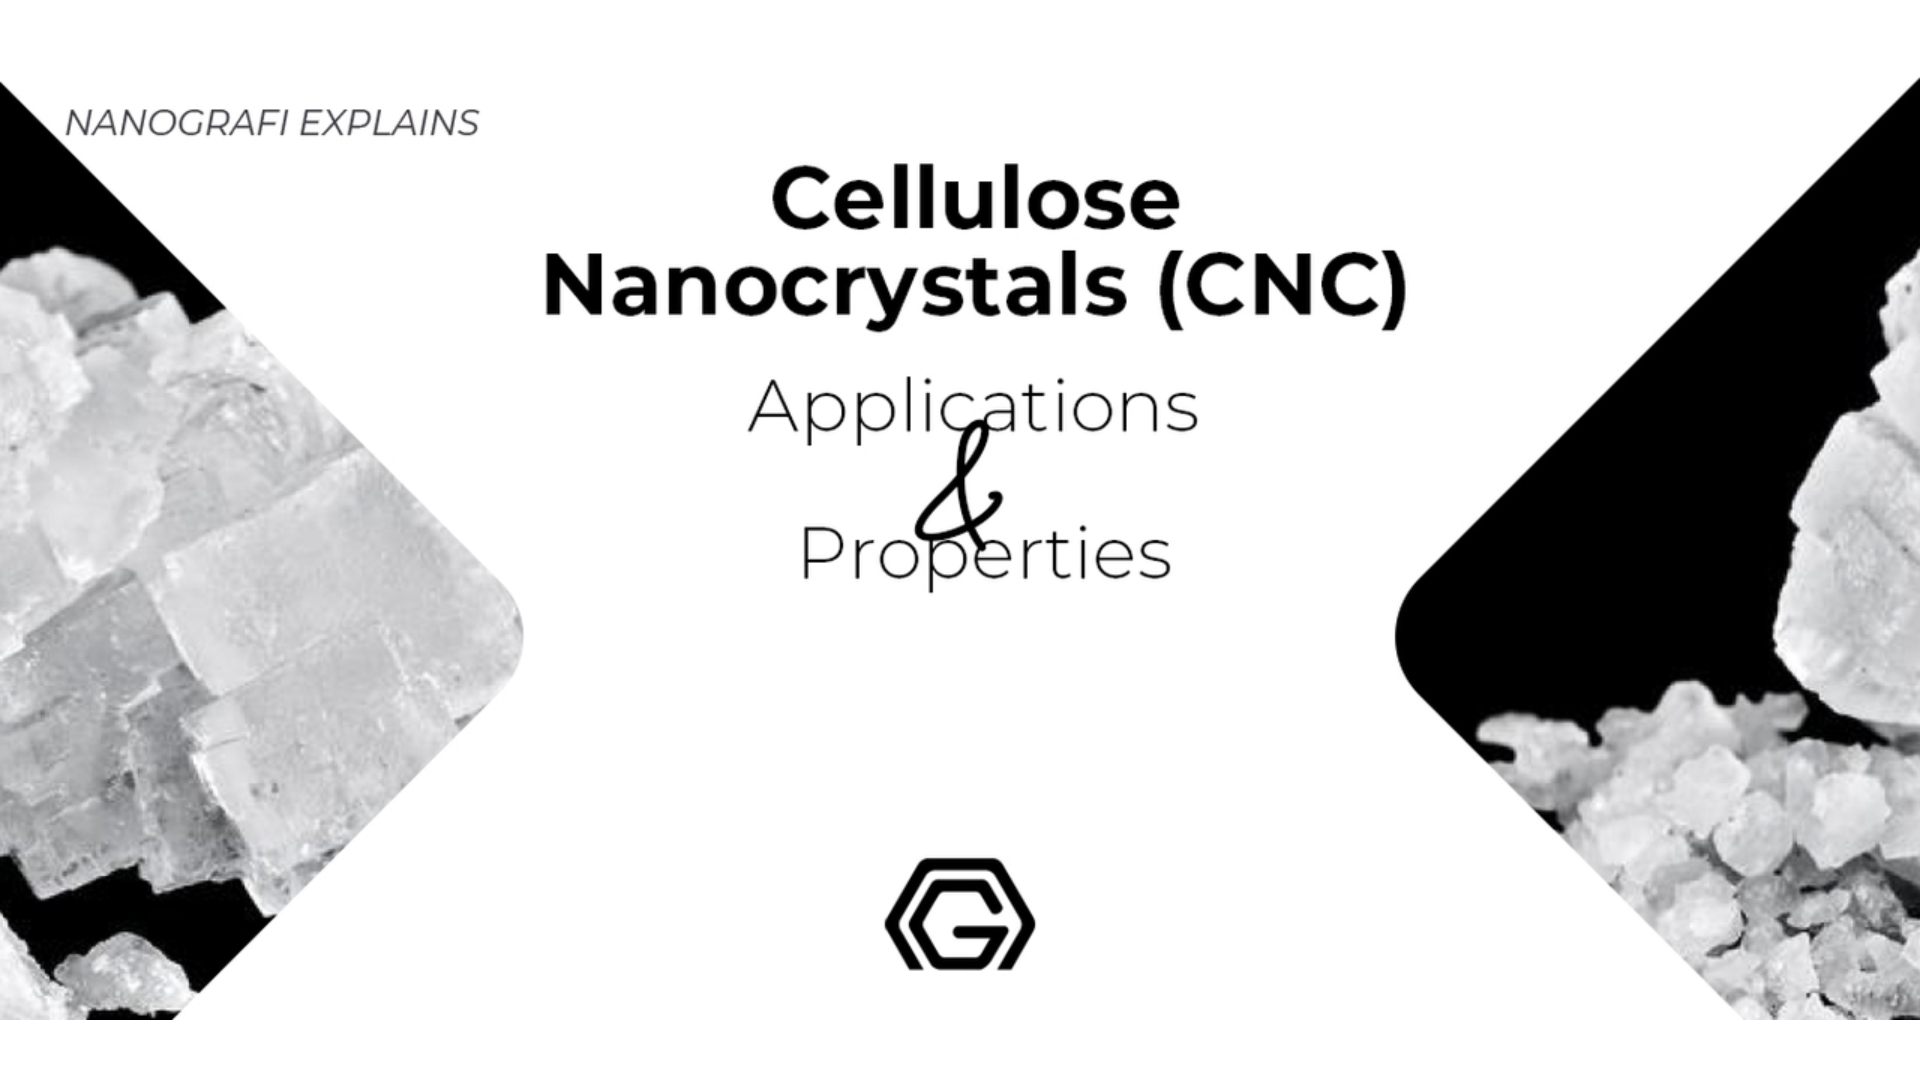 Cellulose nanocrystals, applications & properties